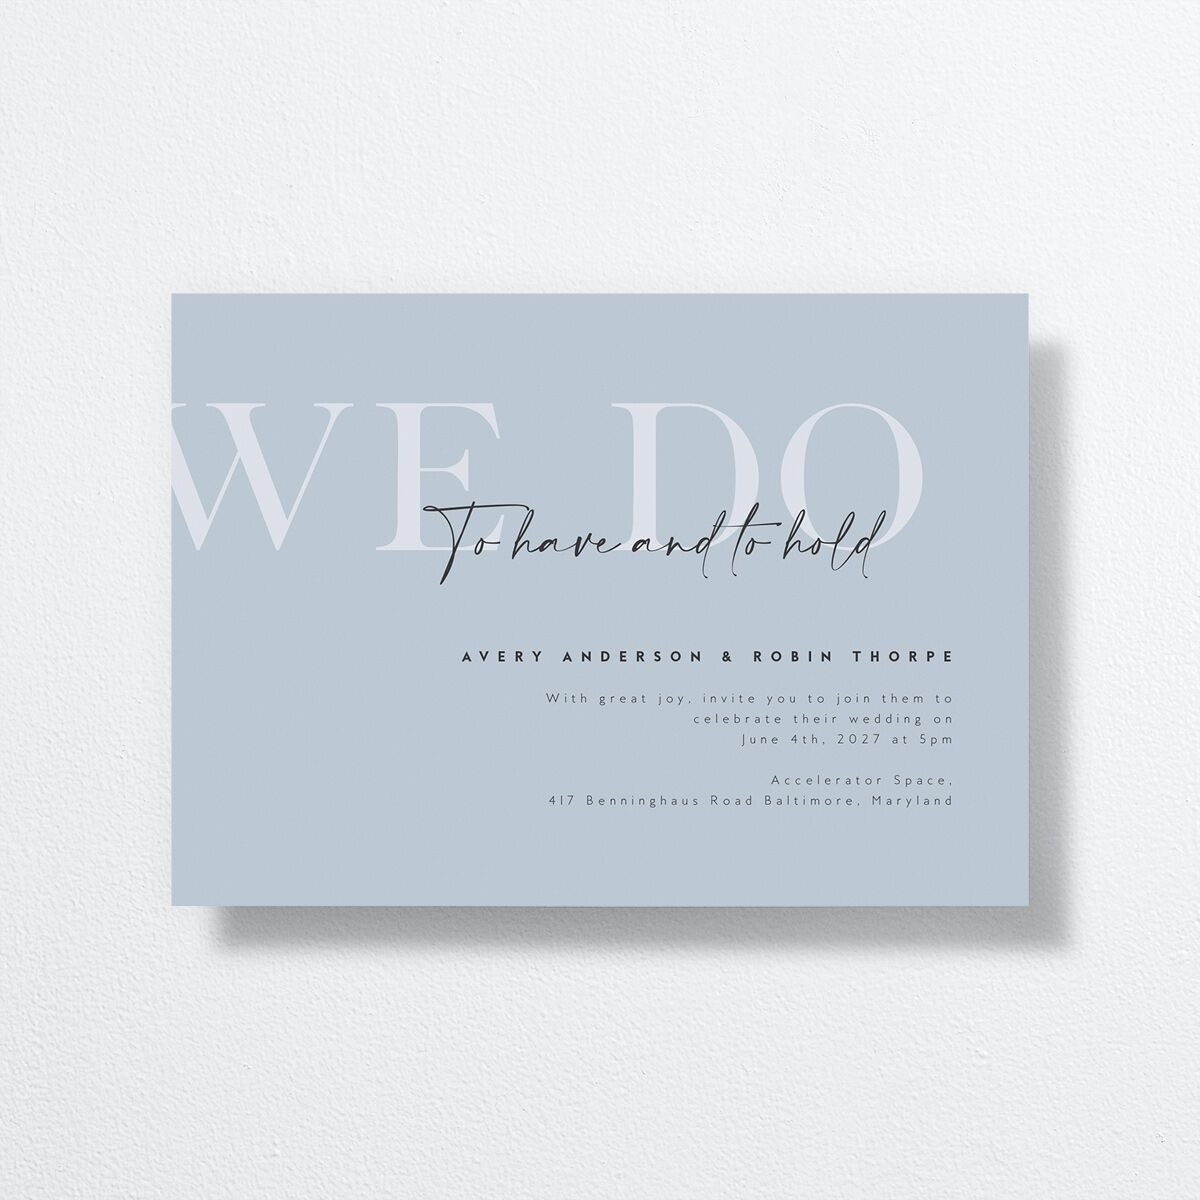 Modern Vow Wedding Invitations front